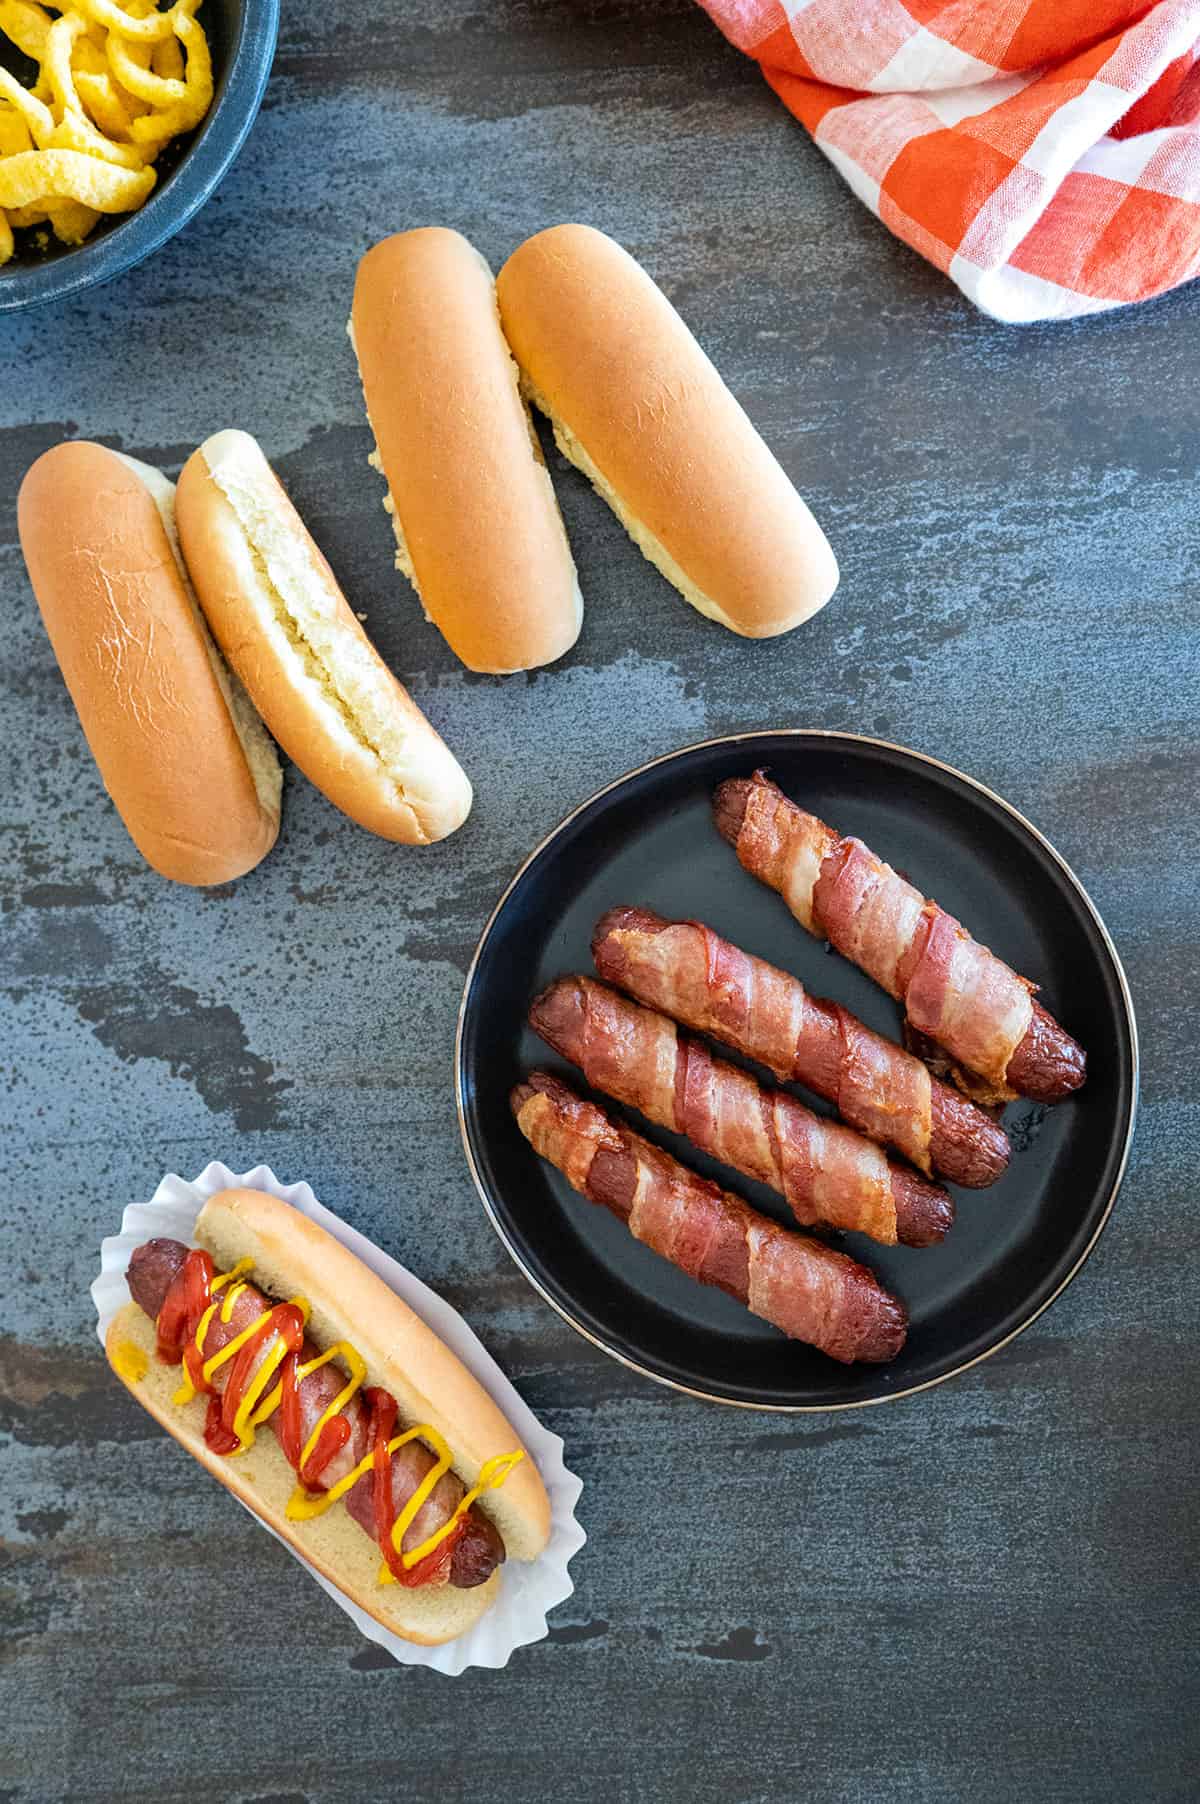 4 bacon-wrapped hot dogs on plate, 1 on bun. 